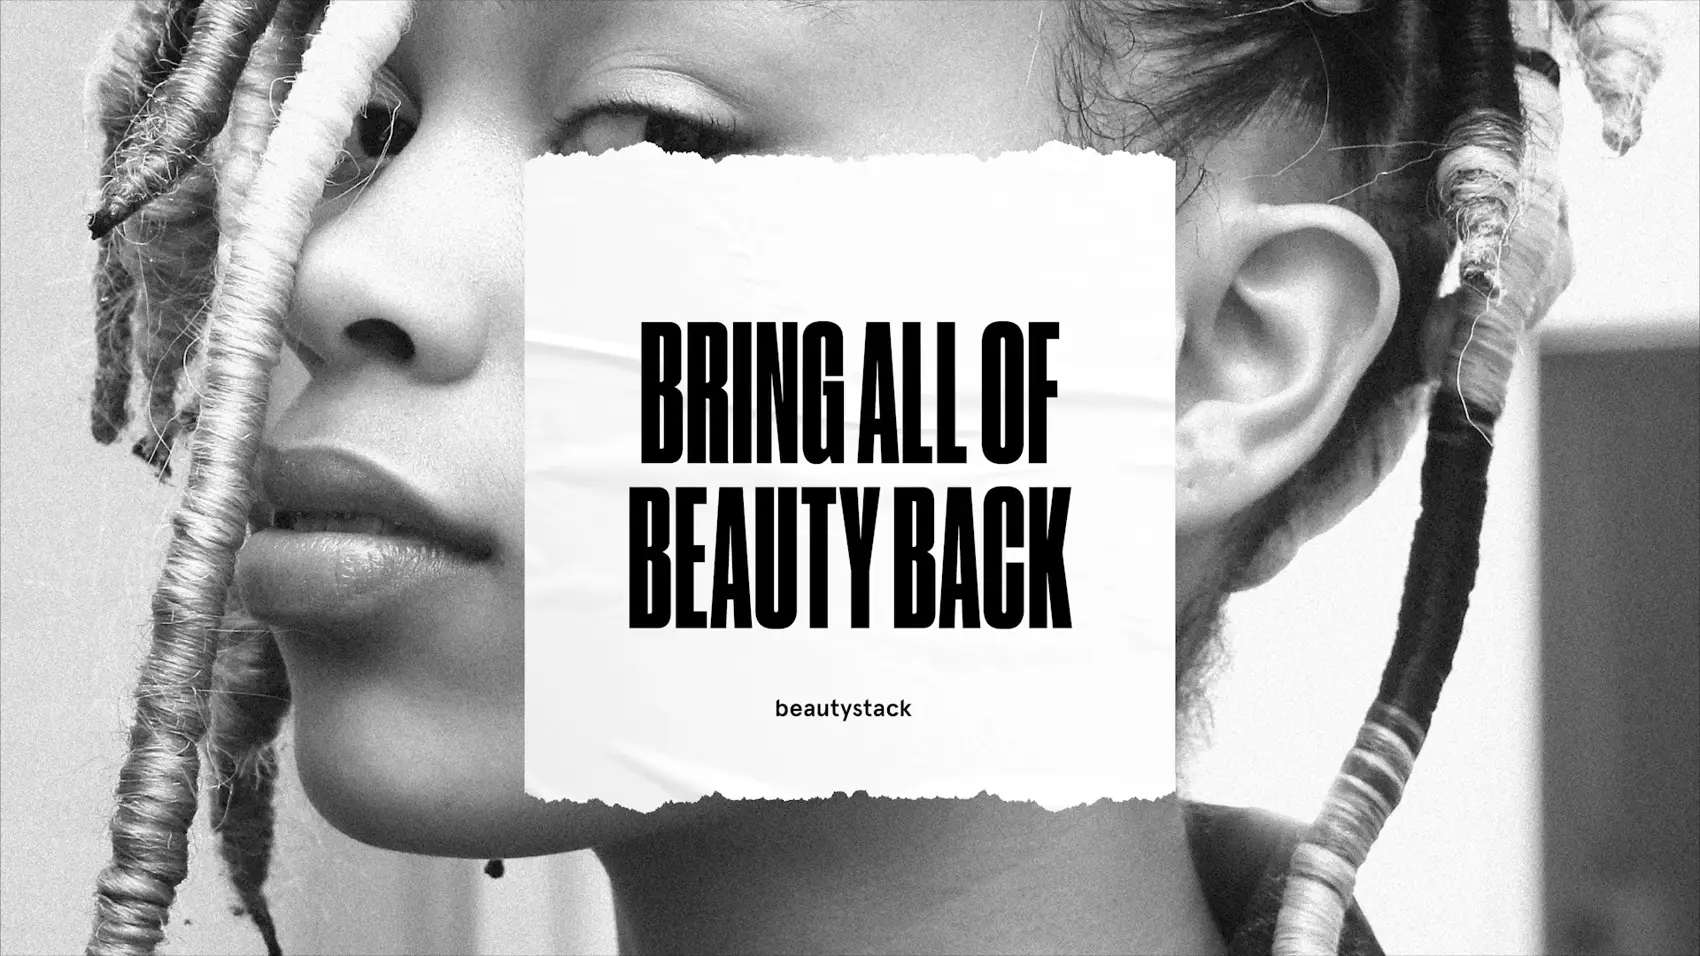 Bring all of beauty back